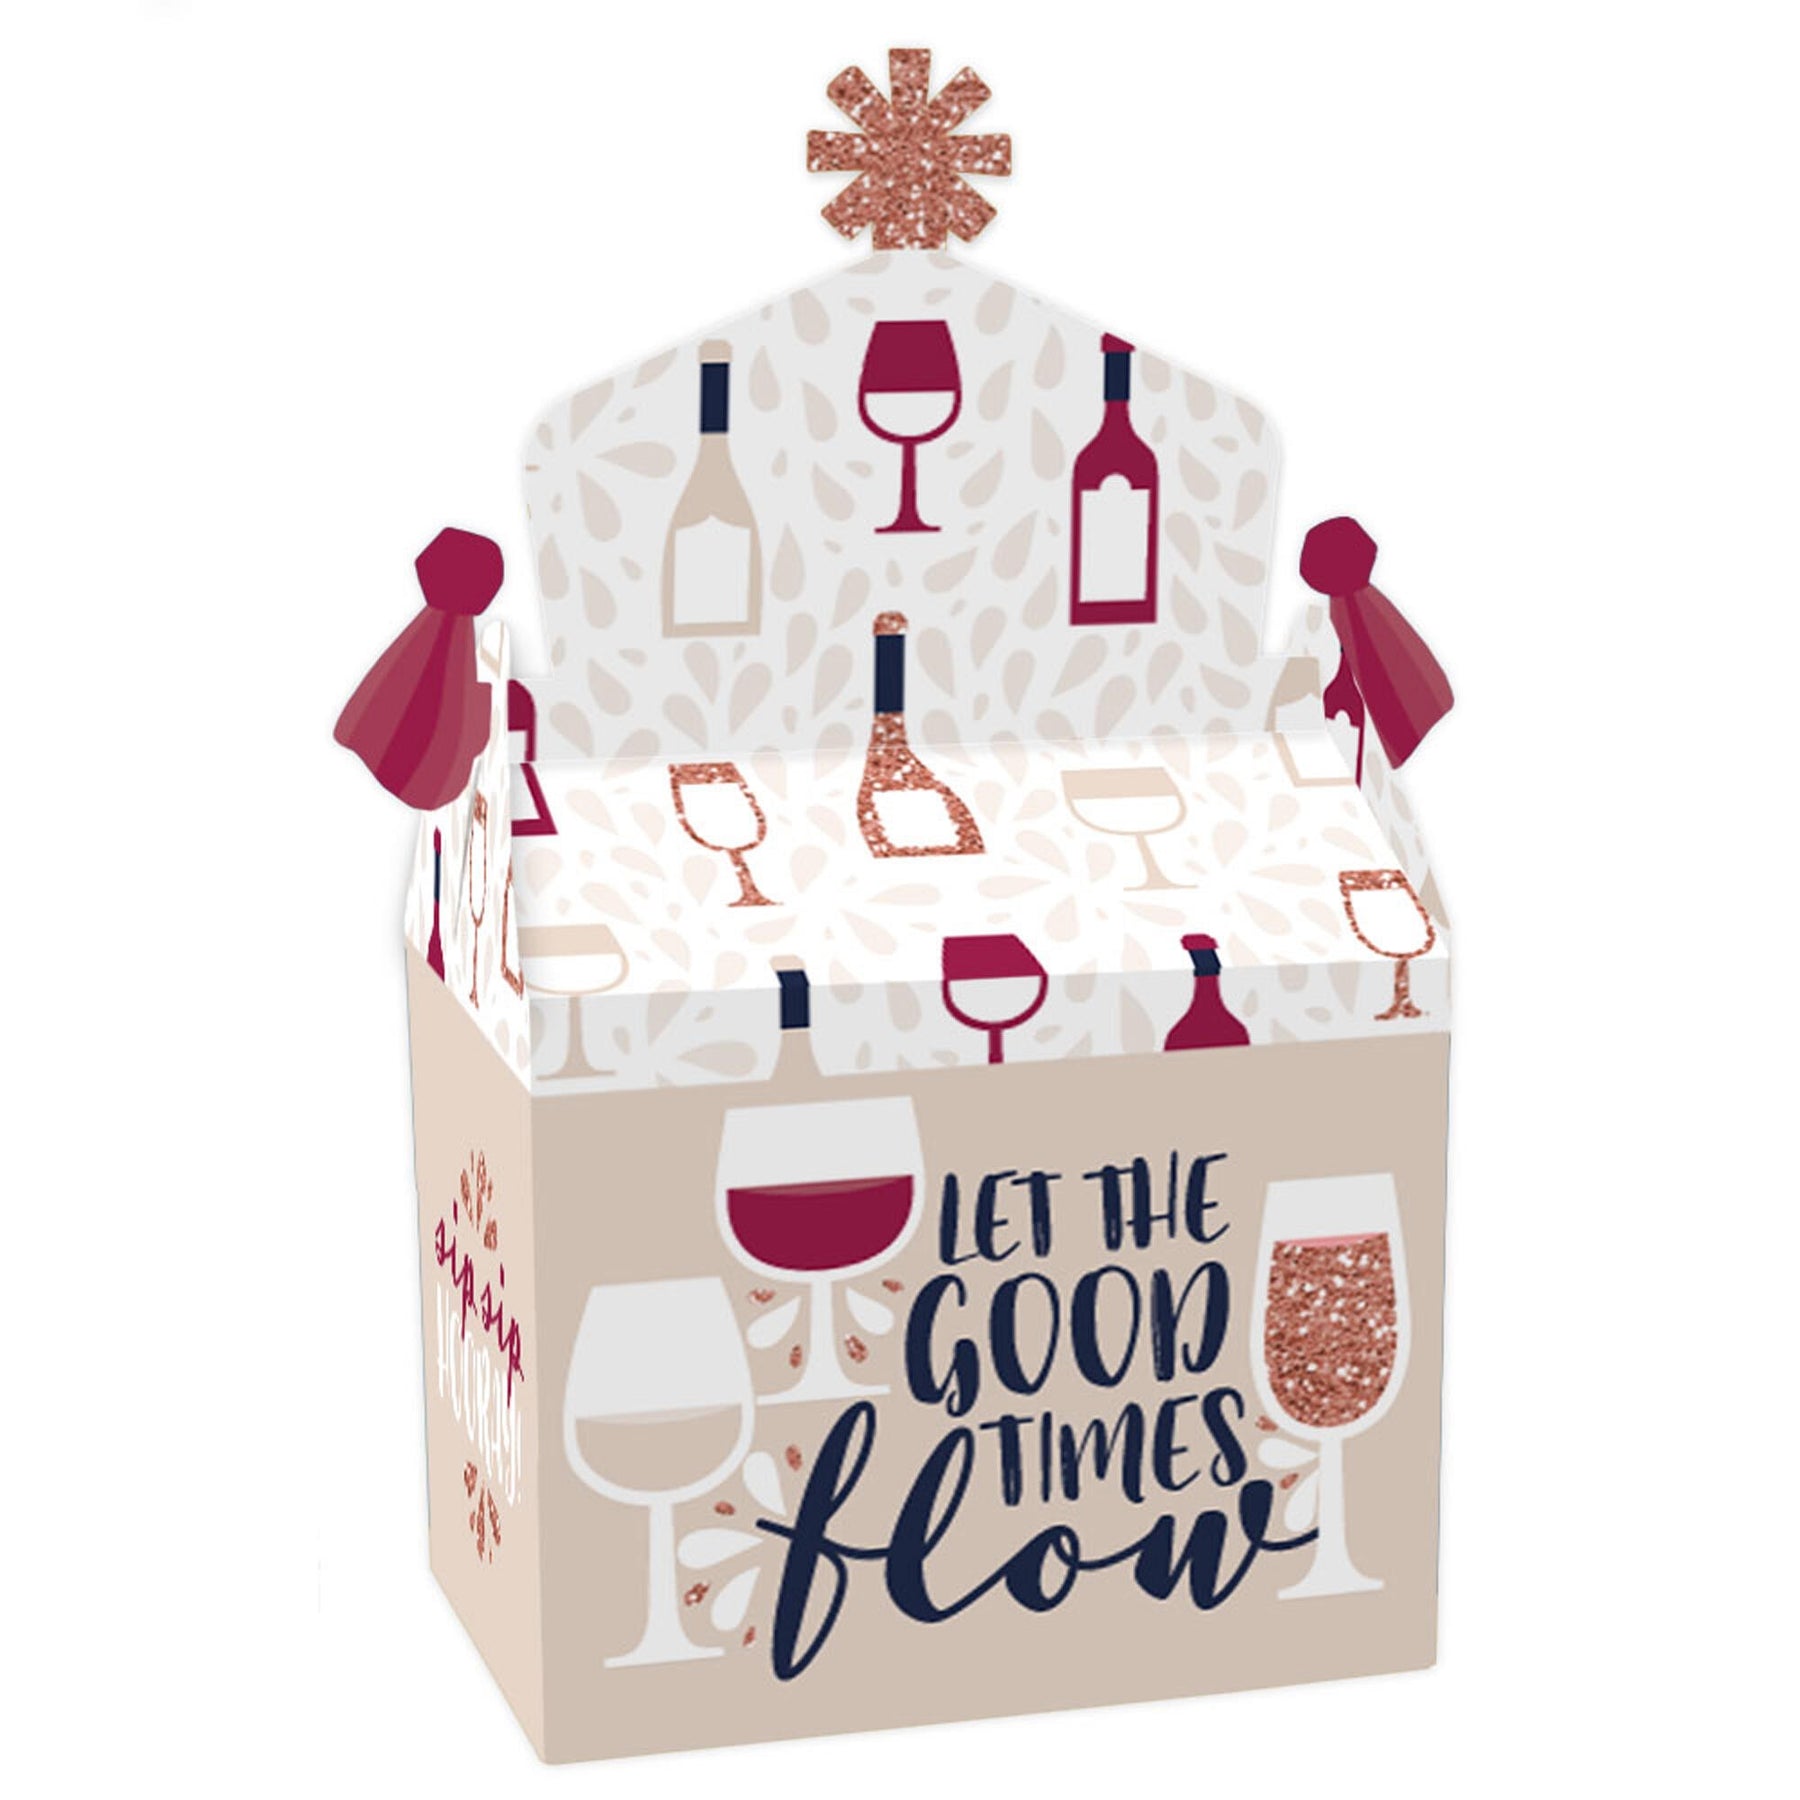 Order your Friday Wine Tasting Box To Go today!